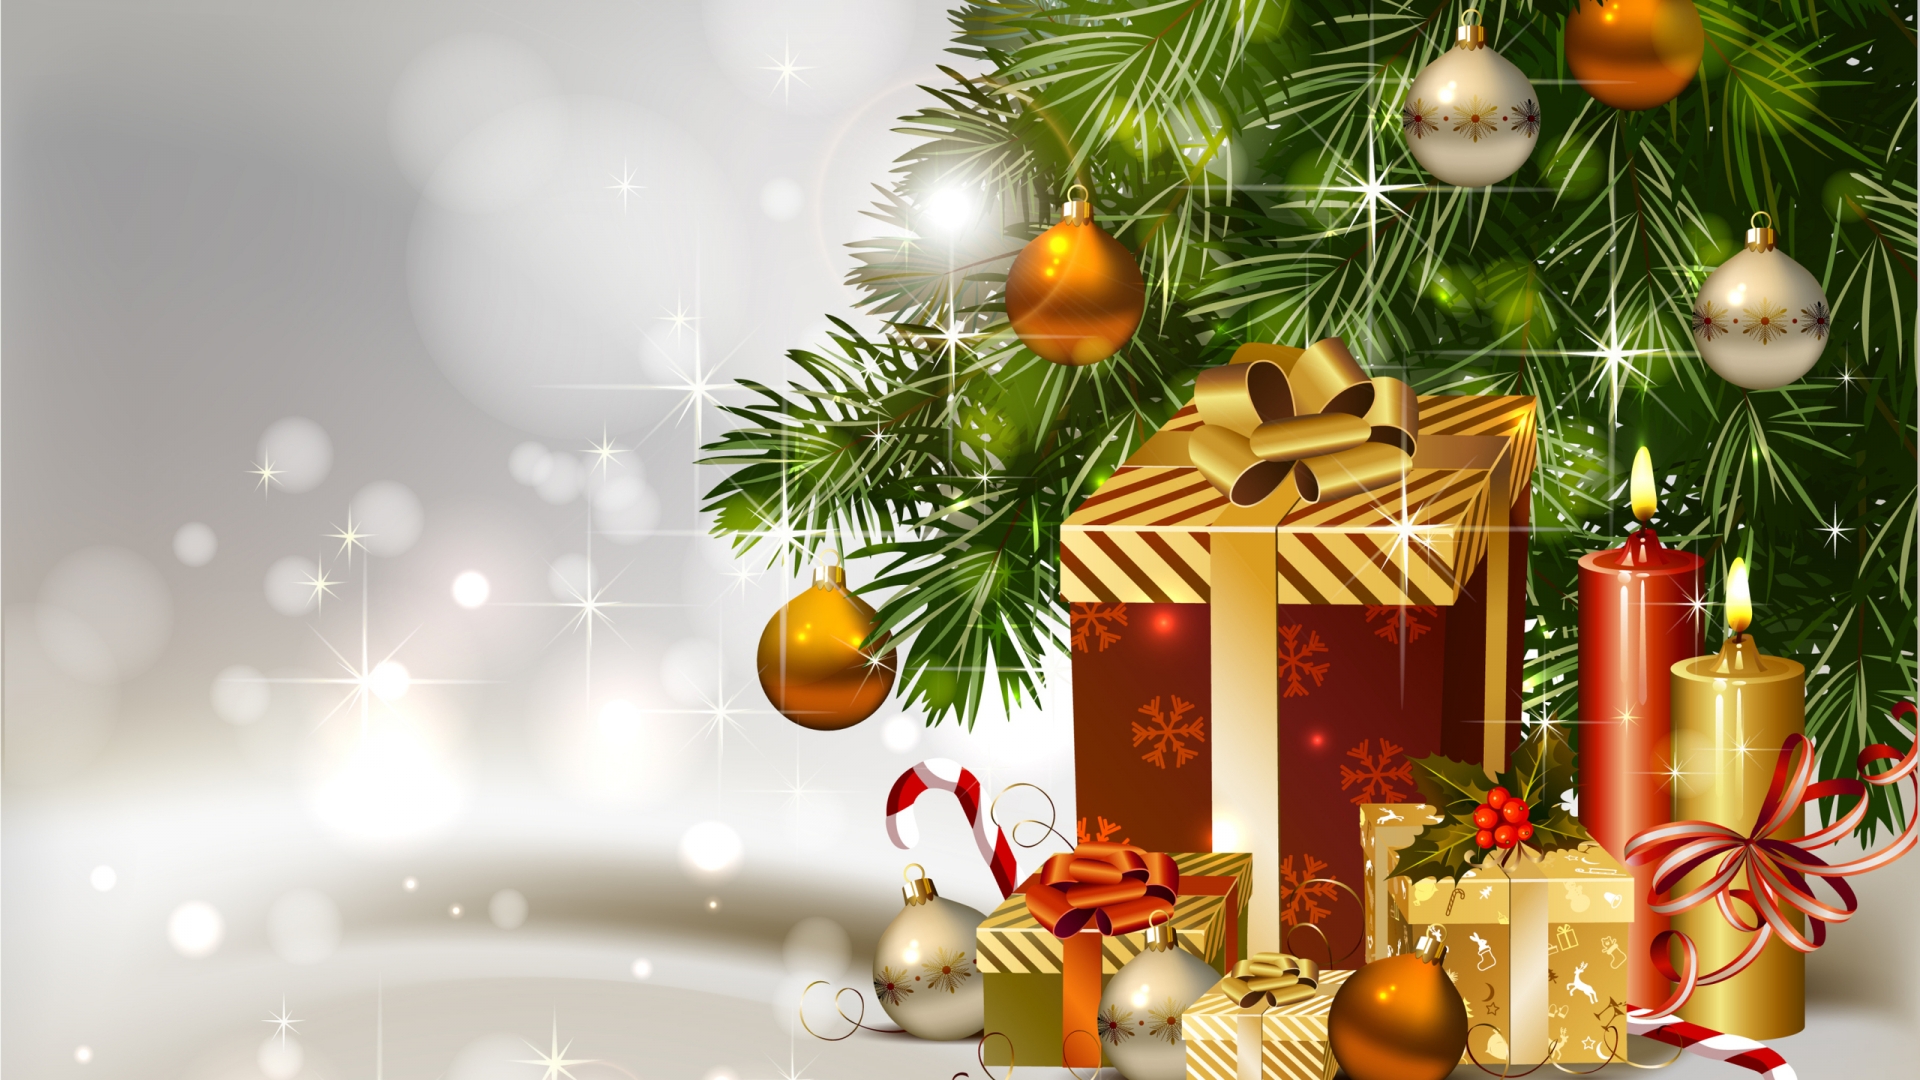 Gifts Under Christmas Tree for 1920 x 1080 HDTV 1080p resolution